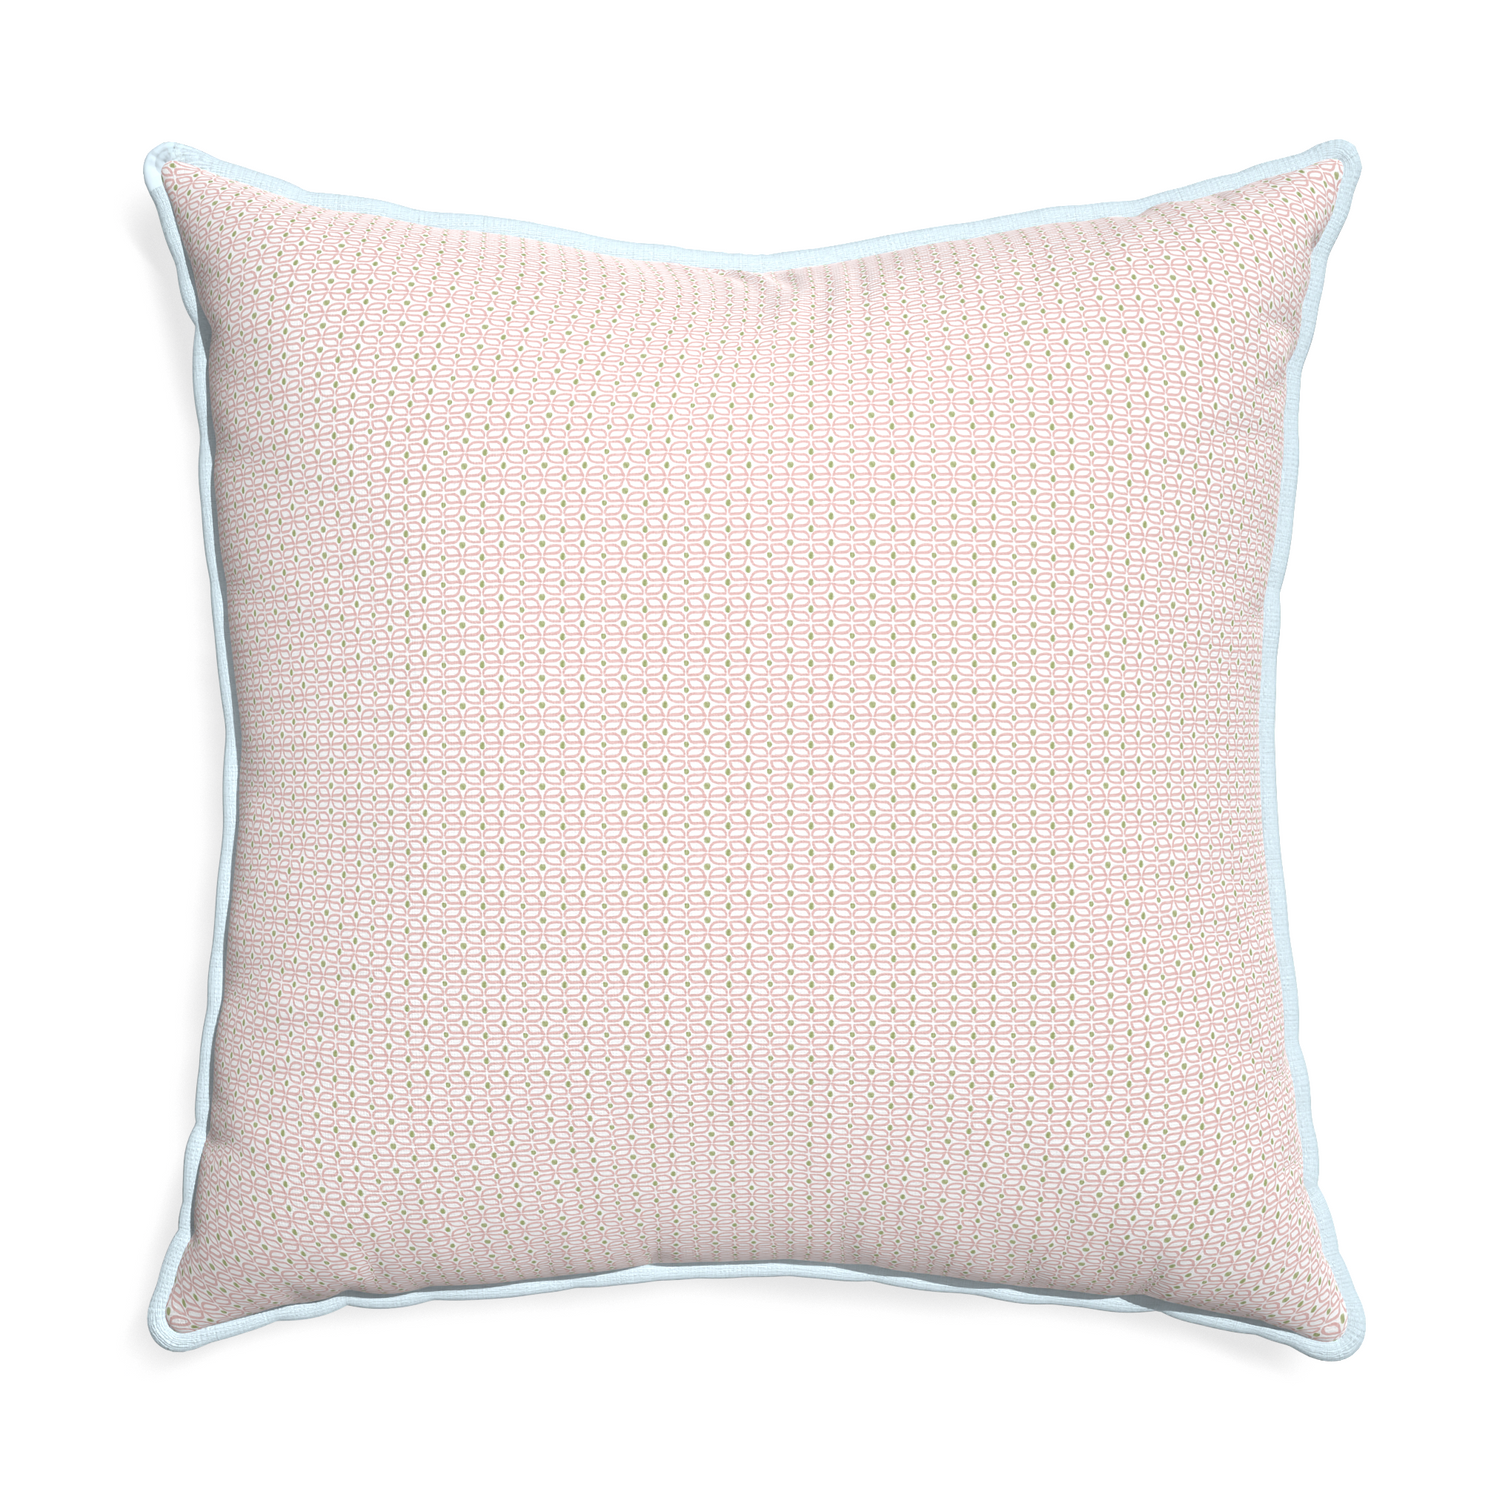 Euro-sham loomi pink custom pillow with powder piping on white background